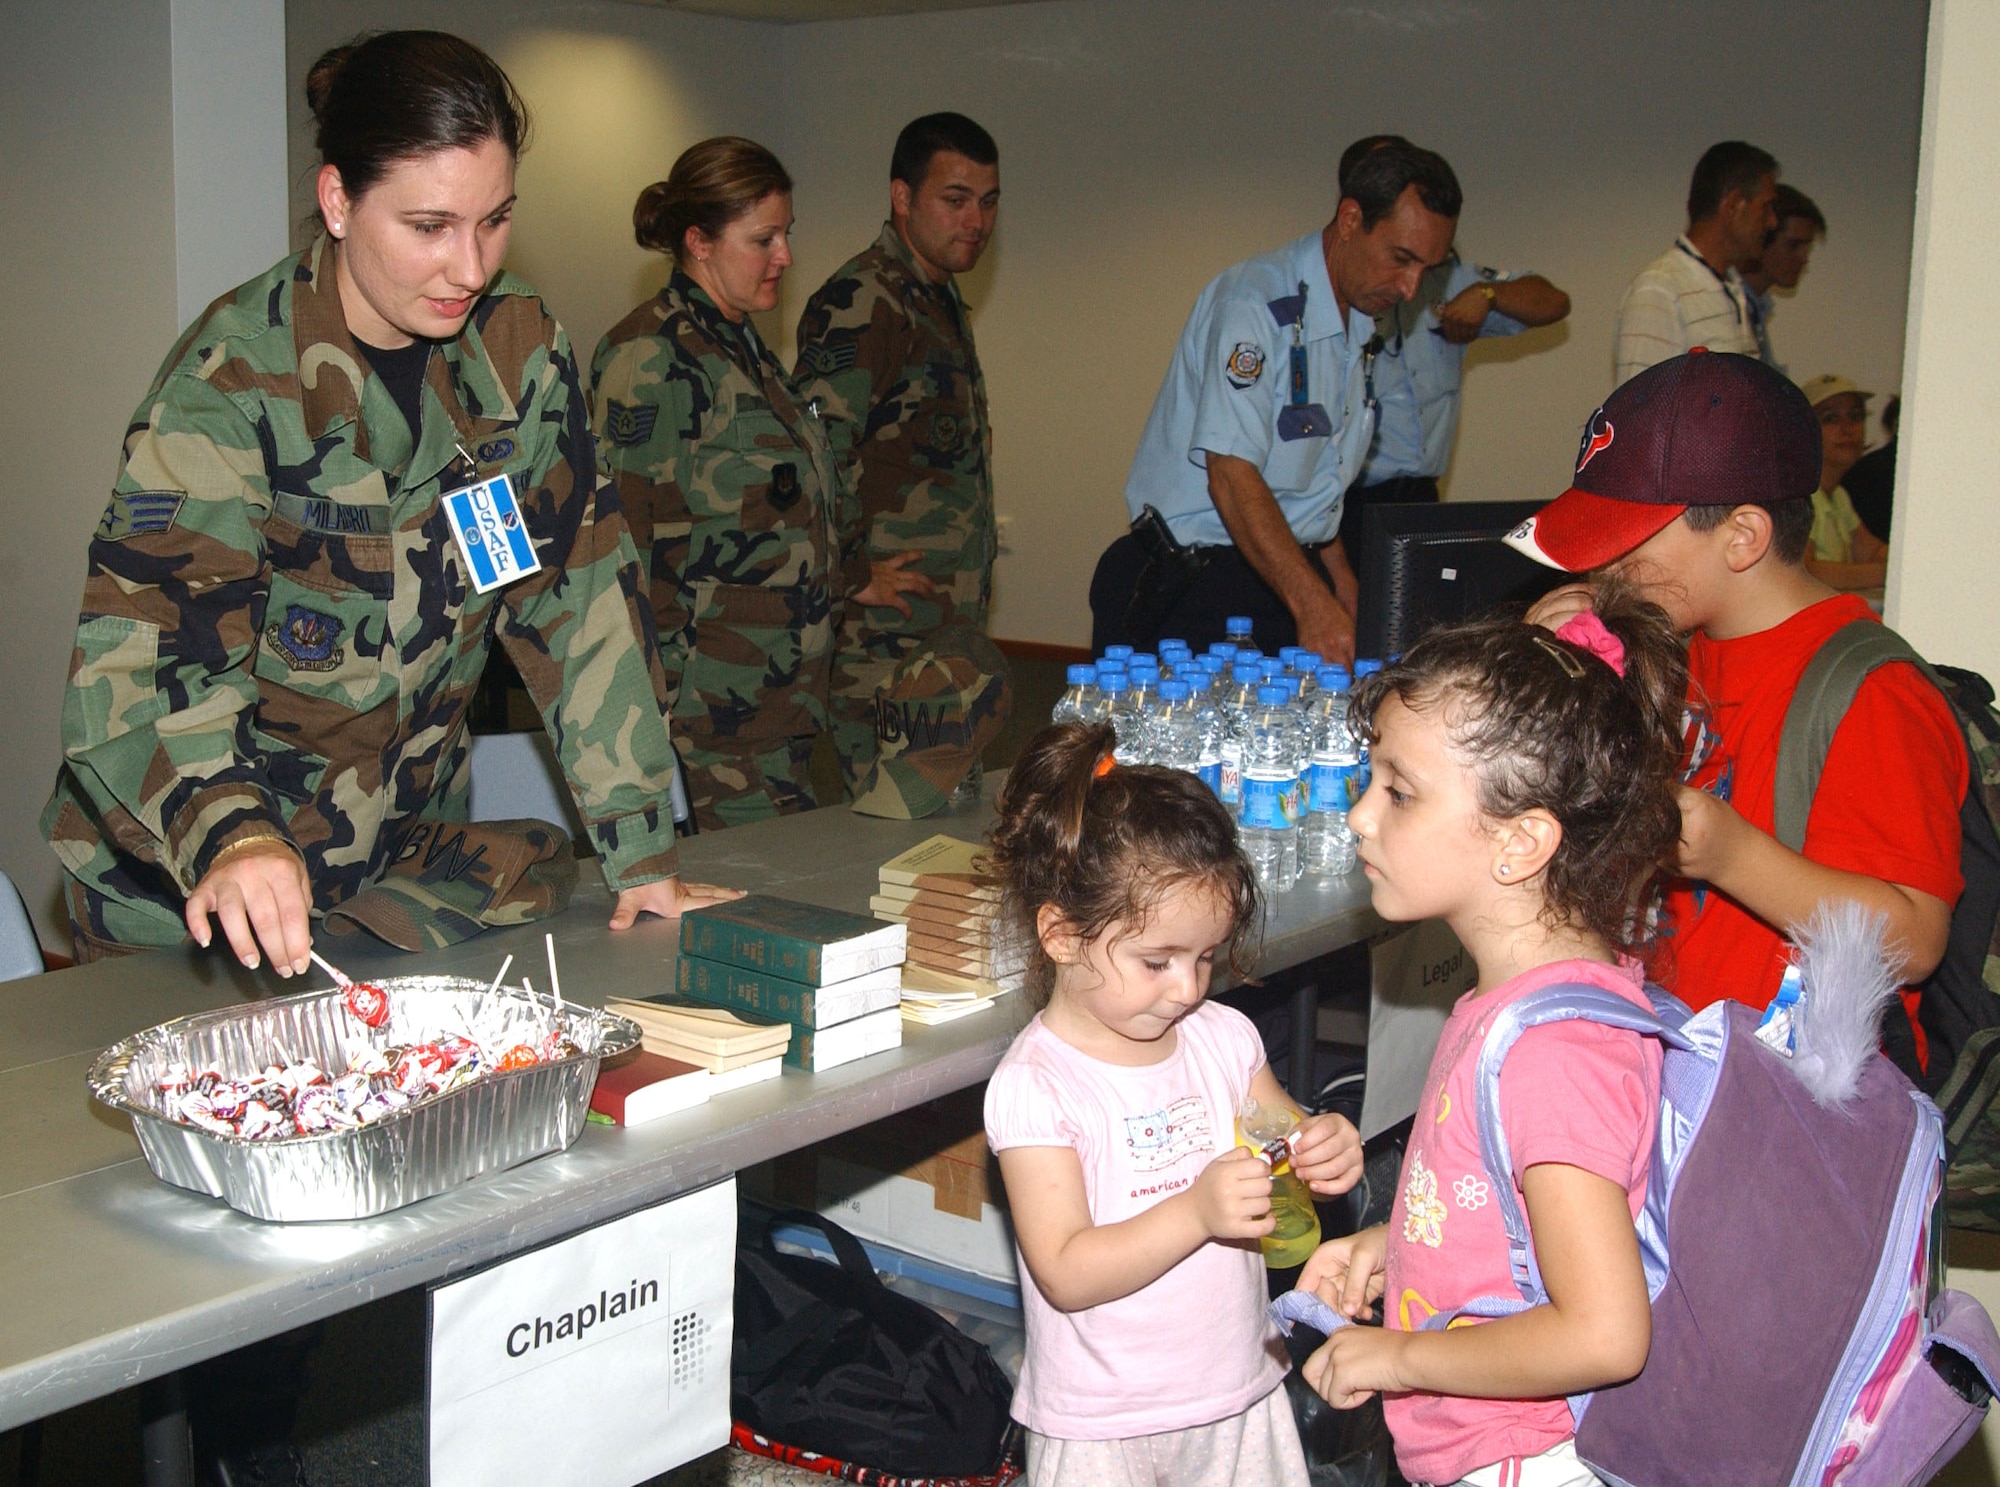 Senior Airman Tianna Milagro offers candy to children arriving at Incirlik Air Base, Turkey, on July 24. The children are among the Americans who left Lebanon and were transiting Turkey on their way to the United States. Airman Milagro is assigned to the 39th Air Base Wing. (U.S. Air Force photo/Airman Kelly L. Flynn)              